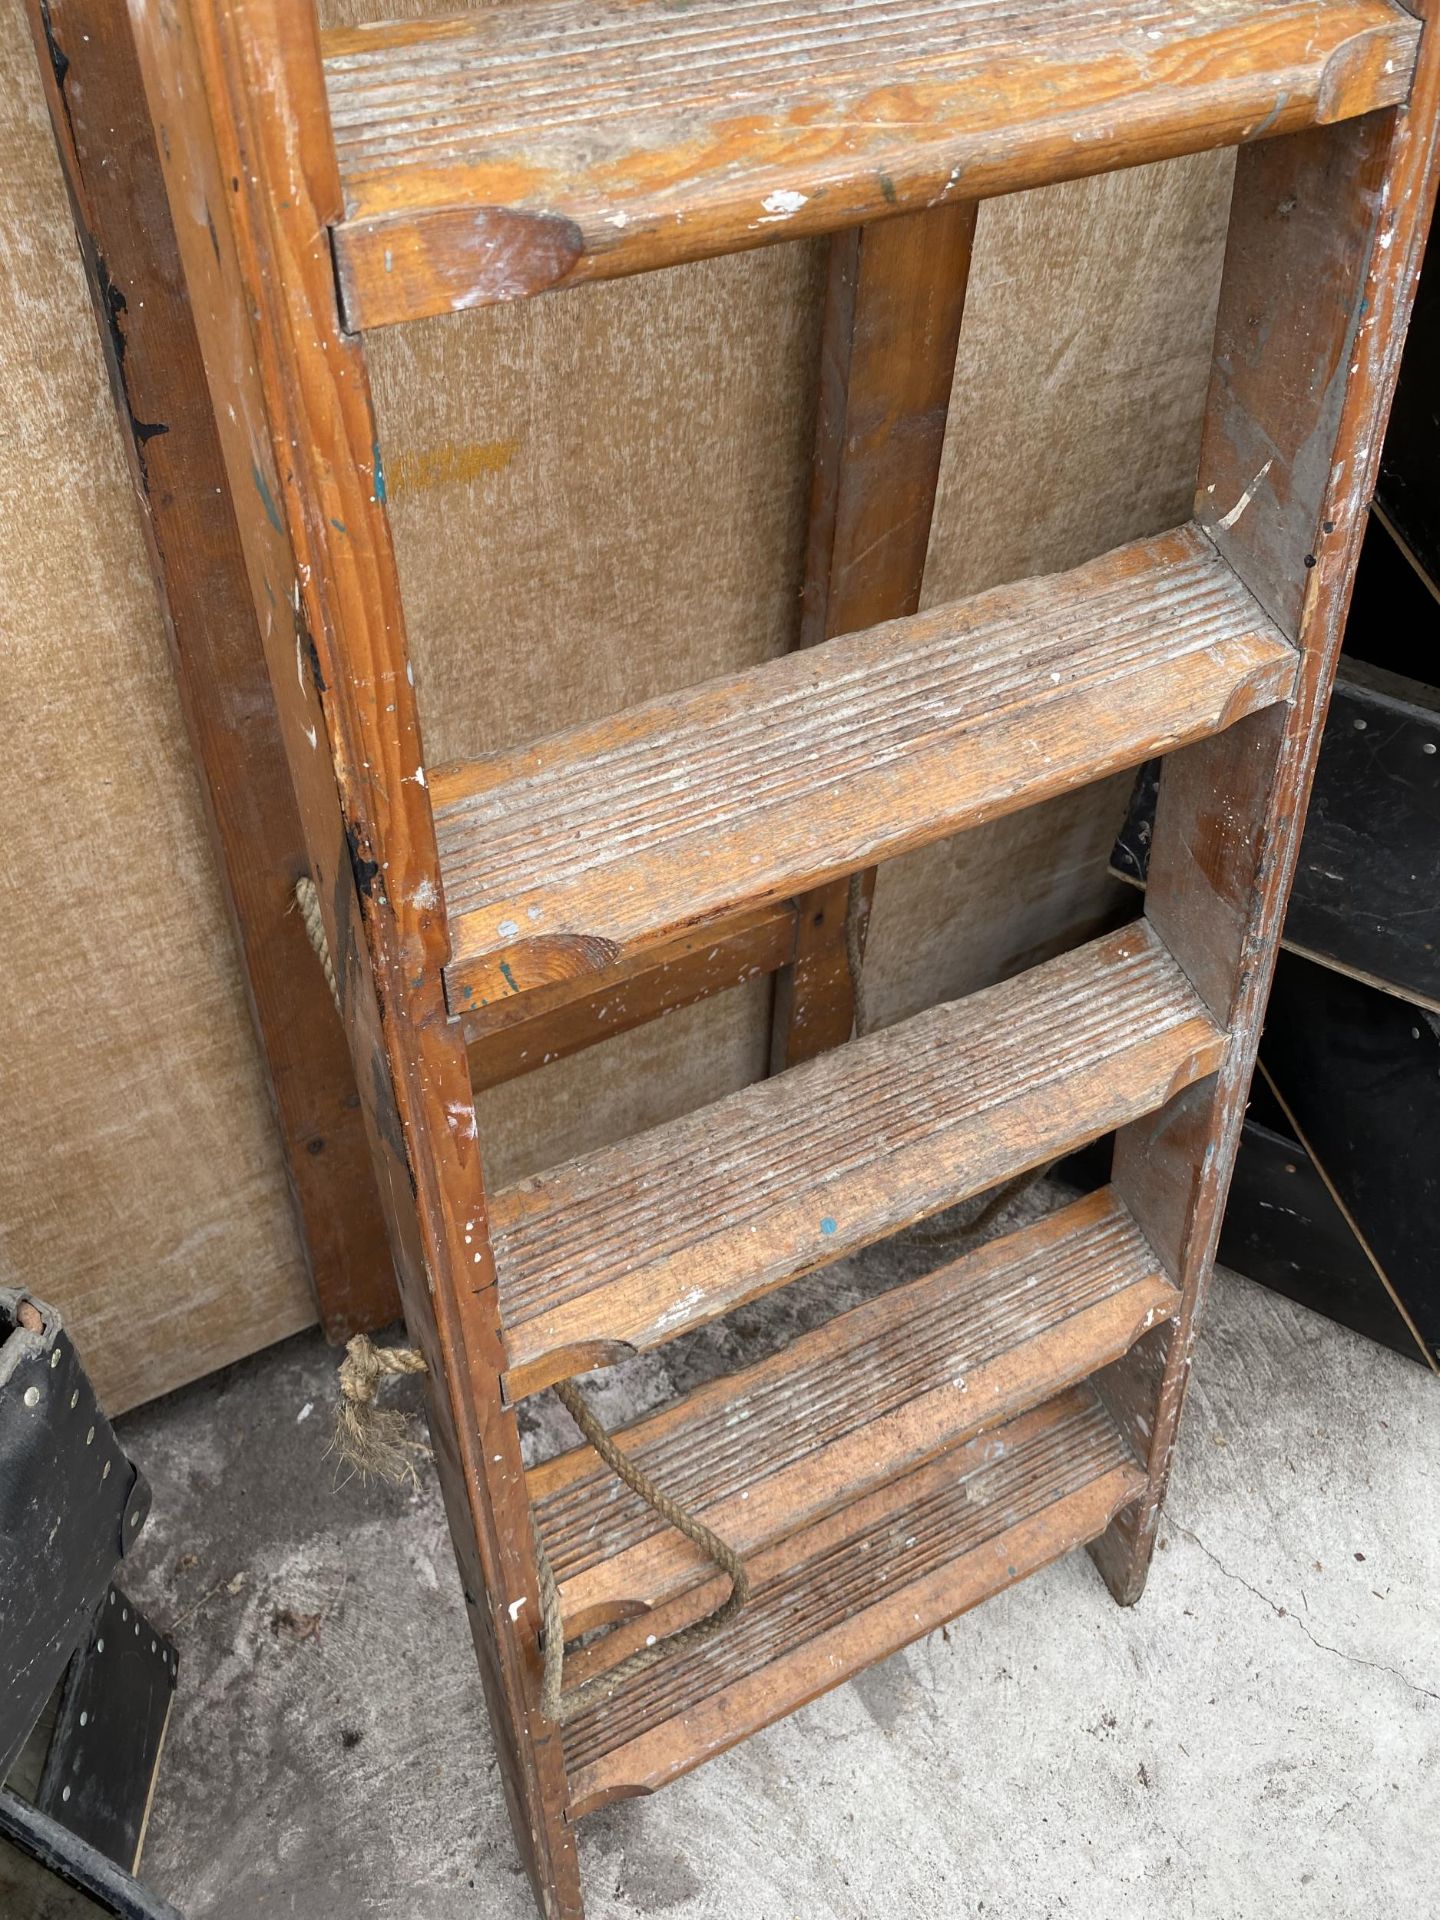 A VINTAGE EIGHT RUNG WOODEN STEP LADDER DATED 1960 AND BELIEVED TO BE FROM NORWEB - Bild 4 aus 5